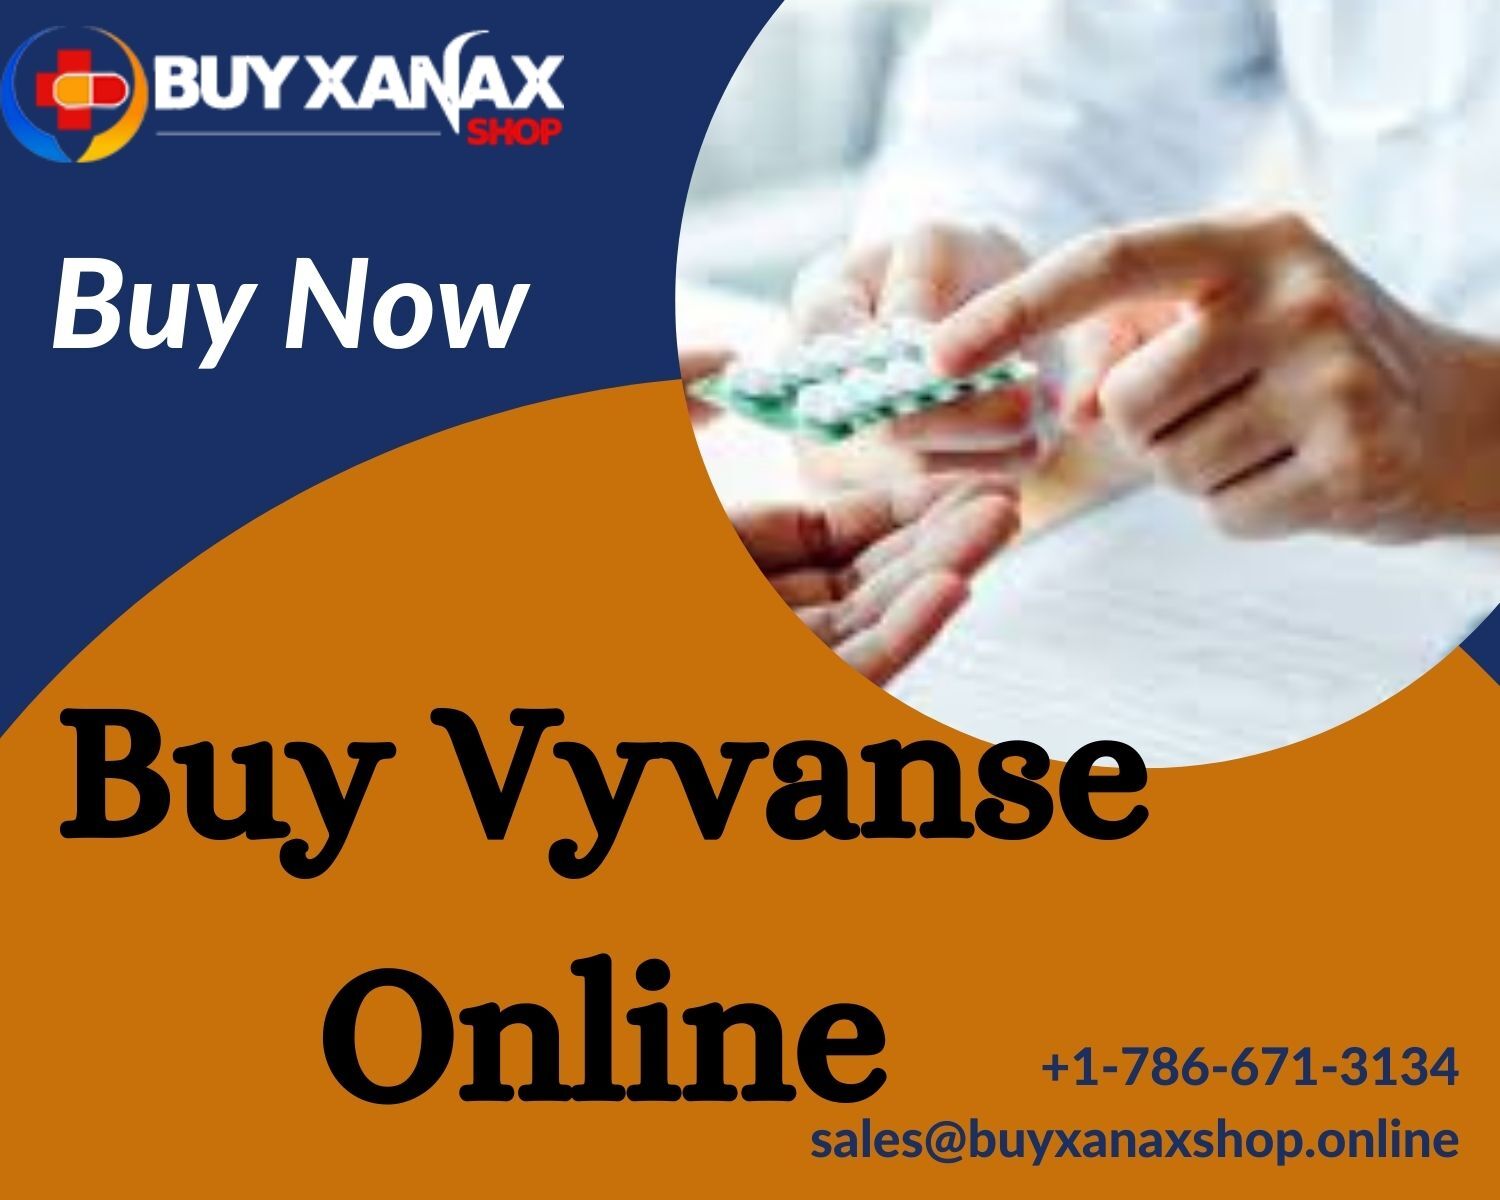 Get Online Vyvanse Overnight Delivery Swiftly